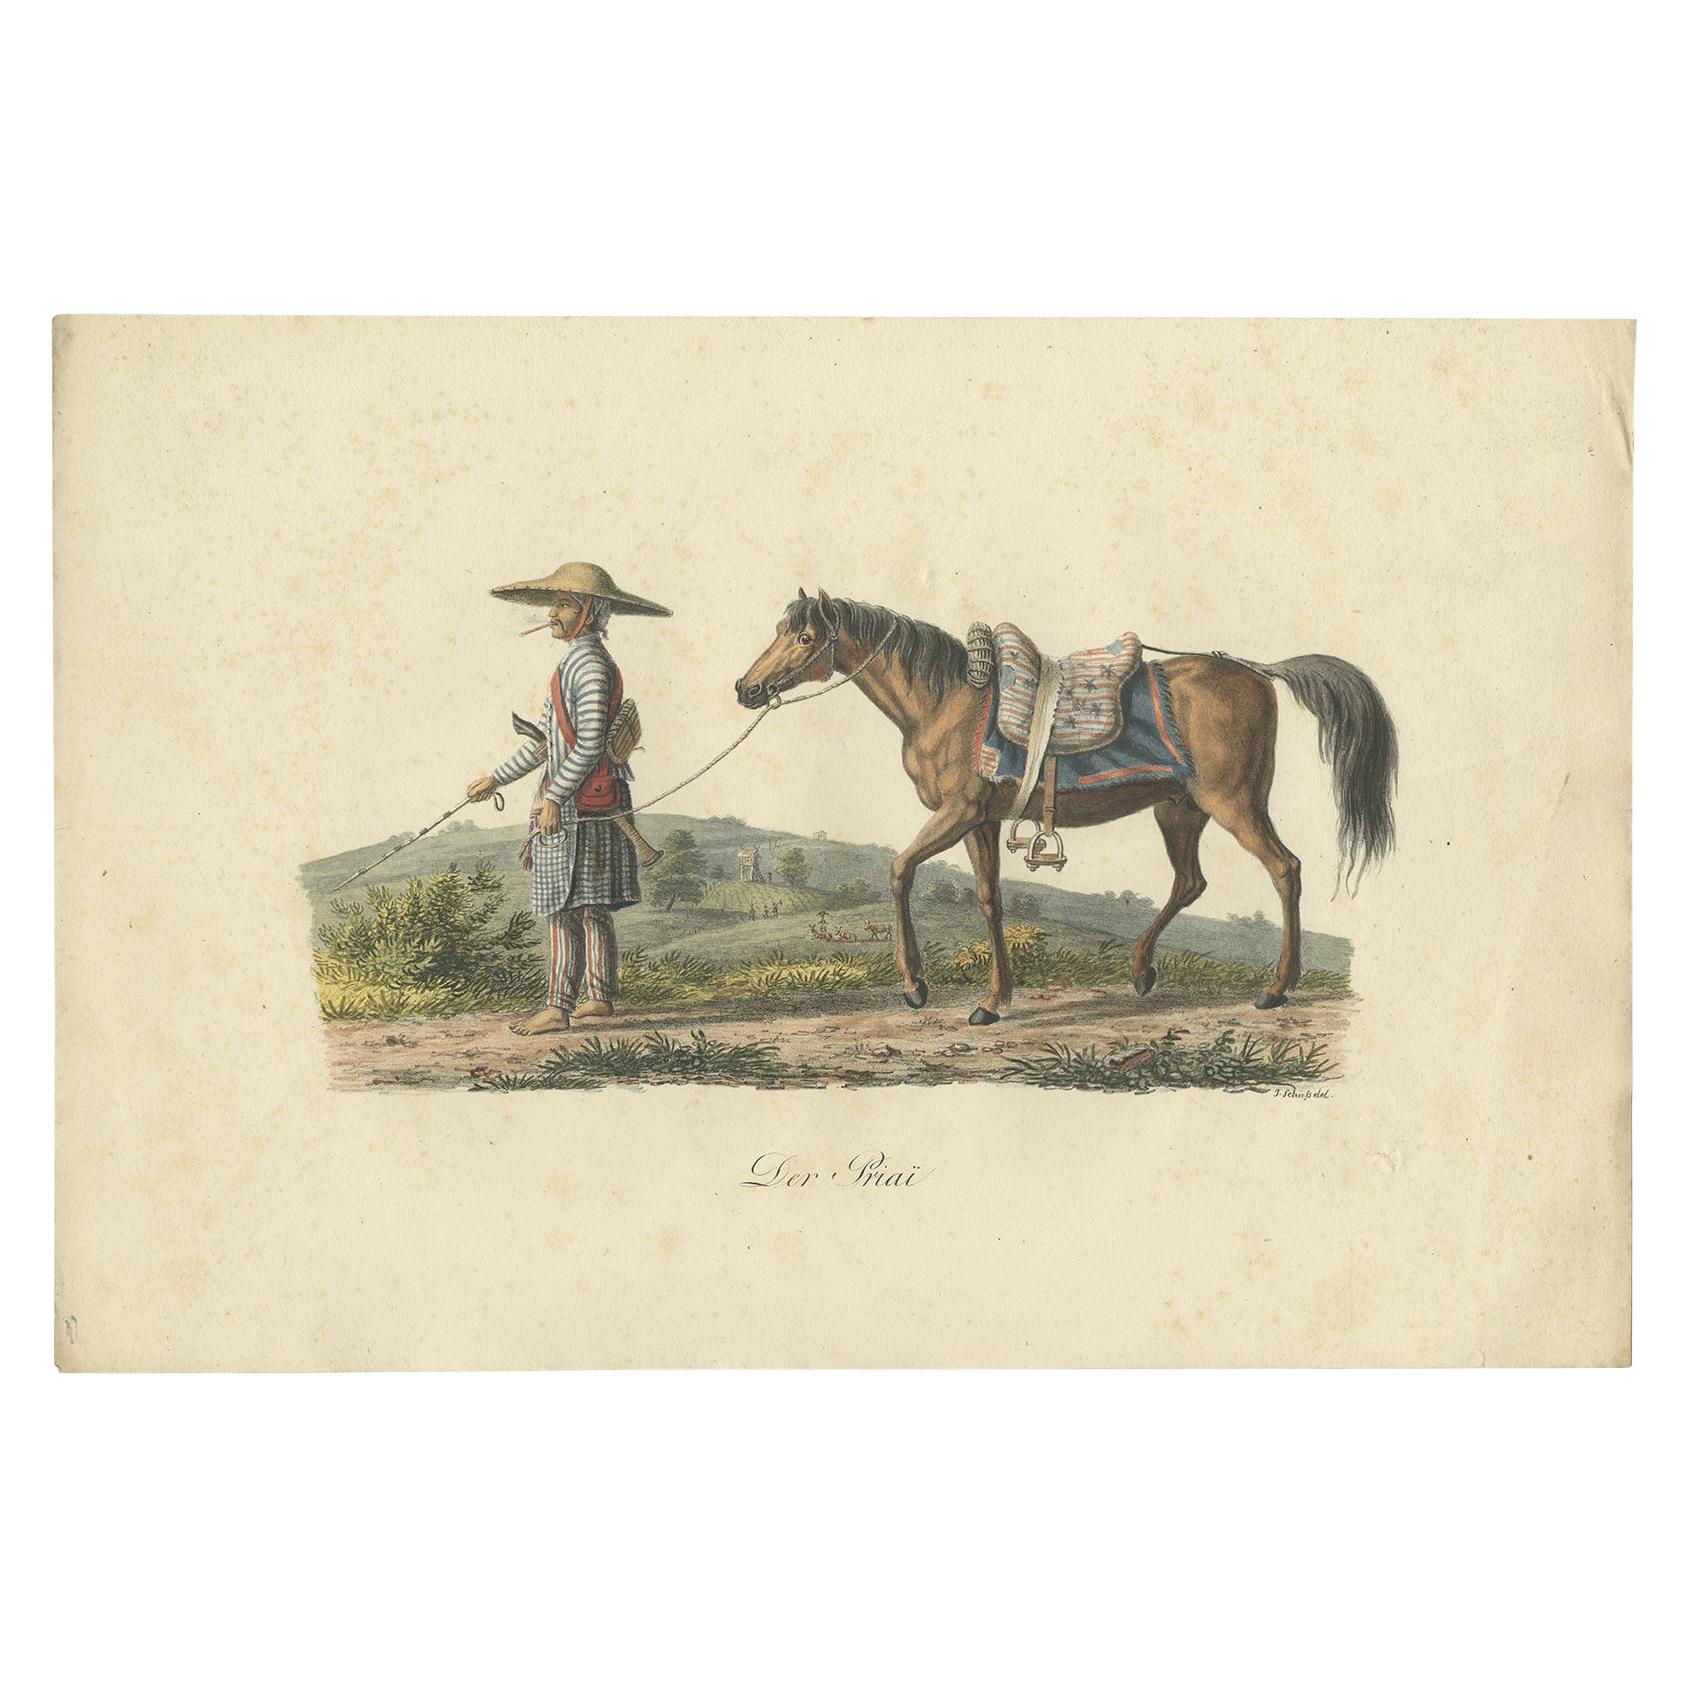 Antique Print of a Civil Servant from Java by Hurter 'circa 1830'